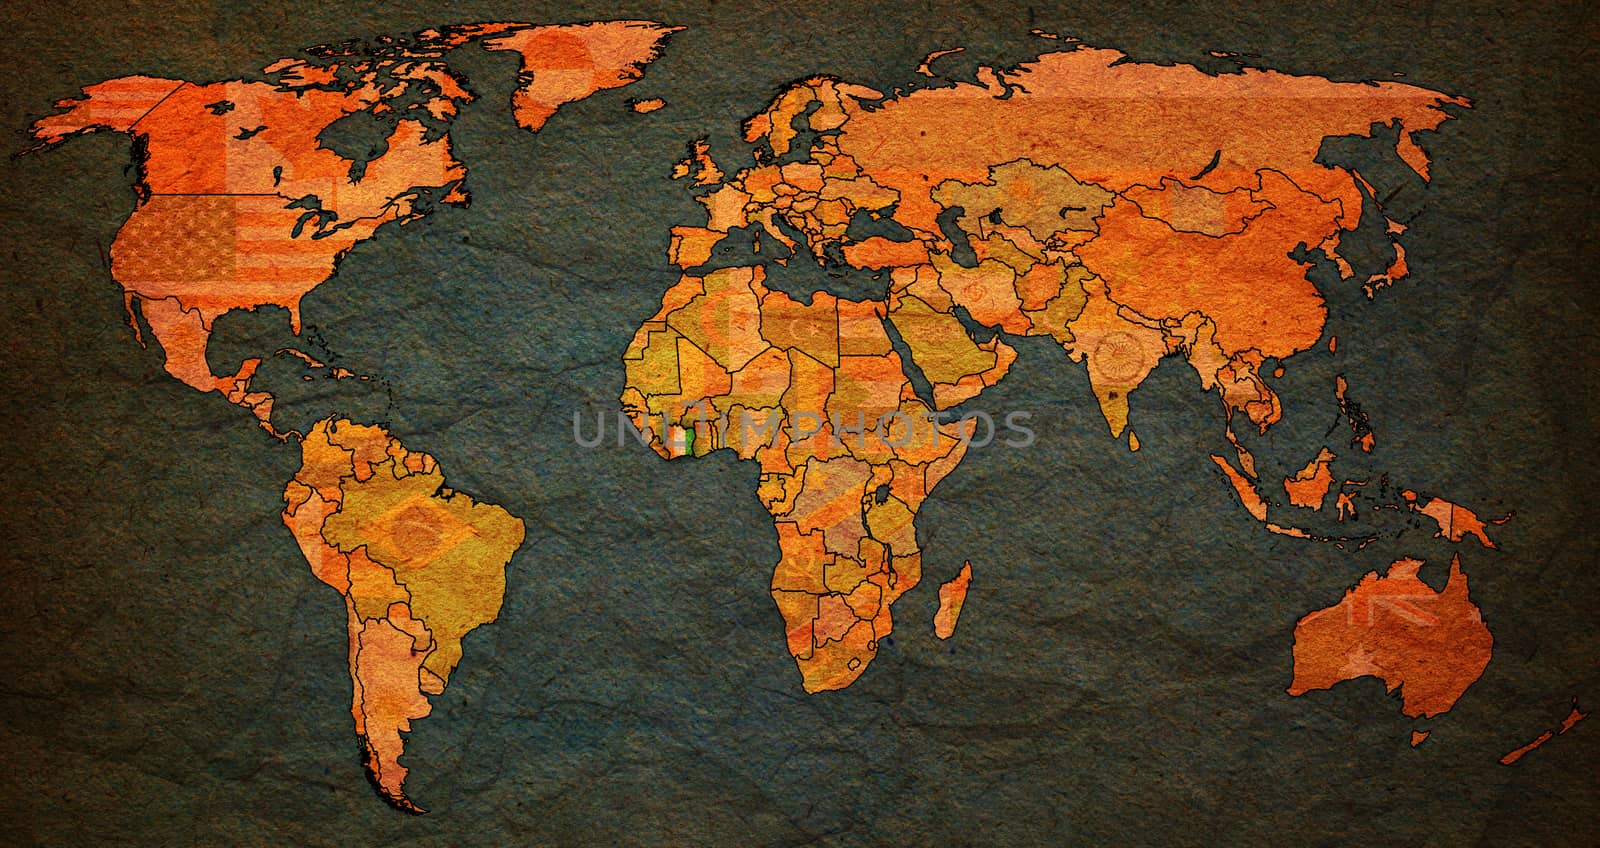 ivory coast territory on actual world map by michal812